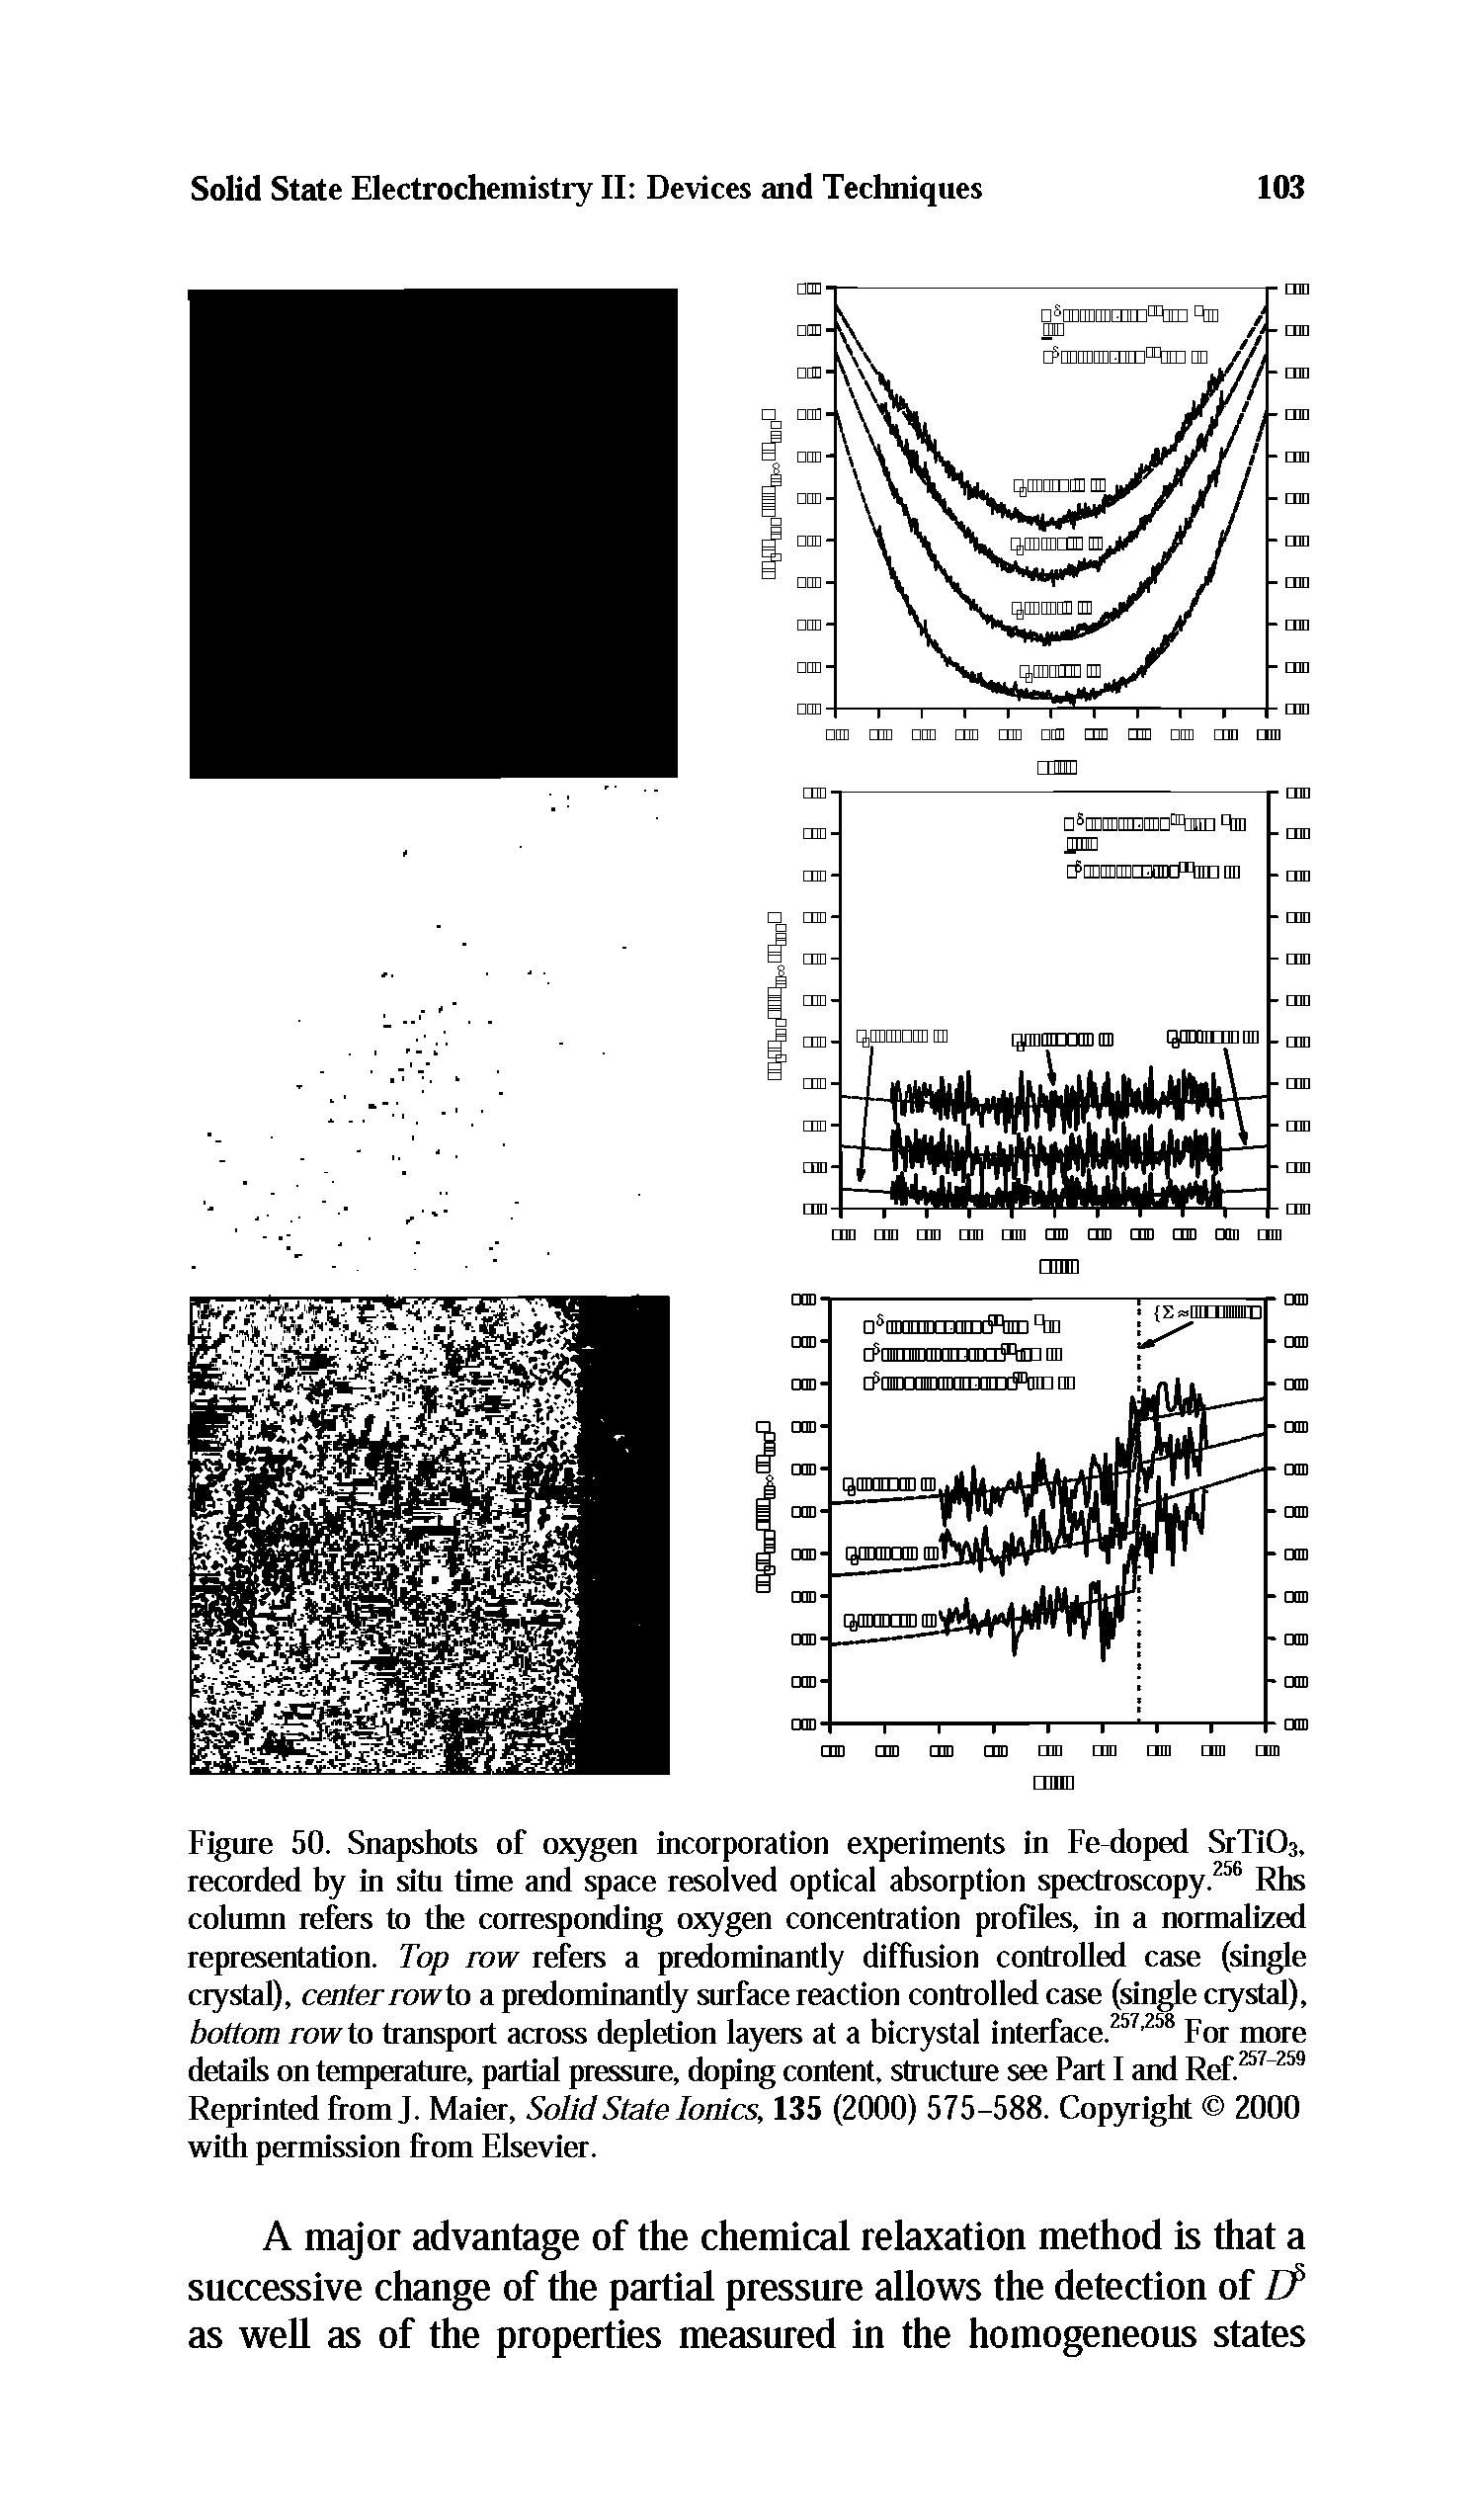 Figure 50. Snapshots of oxygen incorporation experiments in Fe-doped SrTi03, recorded by in situ time and space resolved optical absorption spectroscopy.256 Rhs column refers to the corresponding oxygen concentration profiles, in a normalized representation. Top row refers a predominantly diffusion controlled case (single crystal), center row to a predominandy surface reaction controlled case (single crystal), bottom row to transport across depletion layers at a bicrystal interface.257,258 For more details on temperature, partial pressure, doping content, structure see Part I and Ref.257-259 Reprinted from J. Maier, Solid State Ionics, 135 (2000) 575-588. Copyright 2000 with permission from Elsevier.